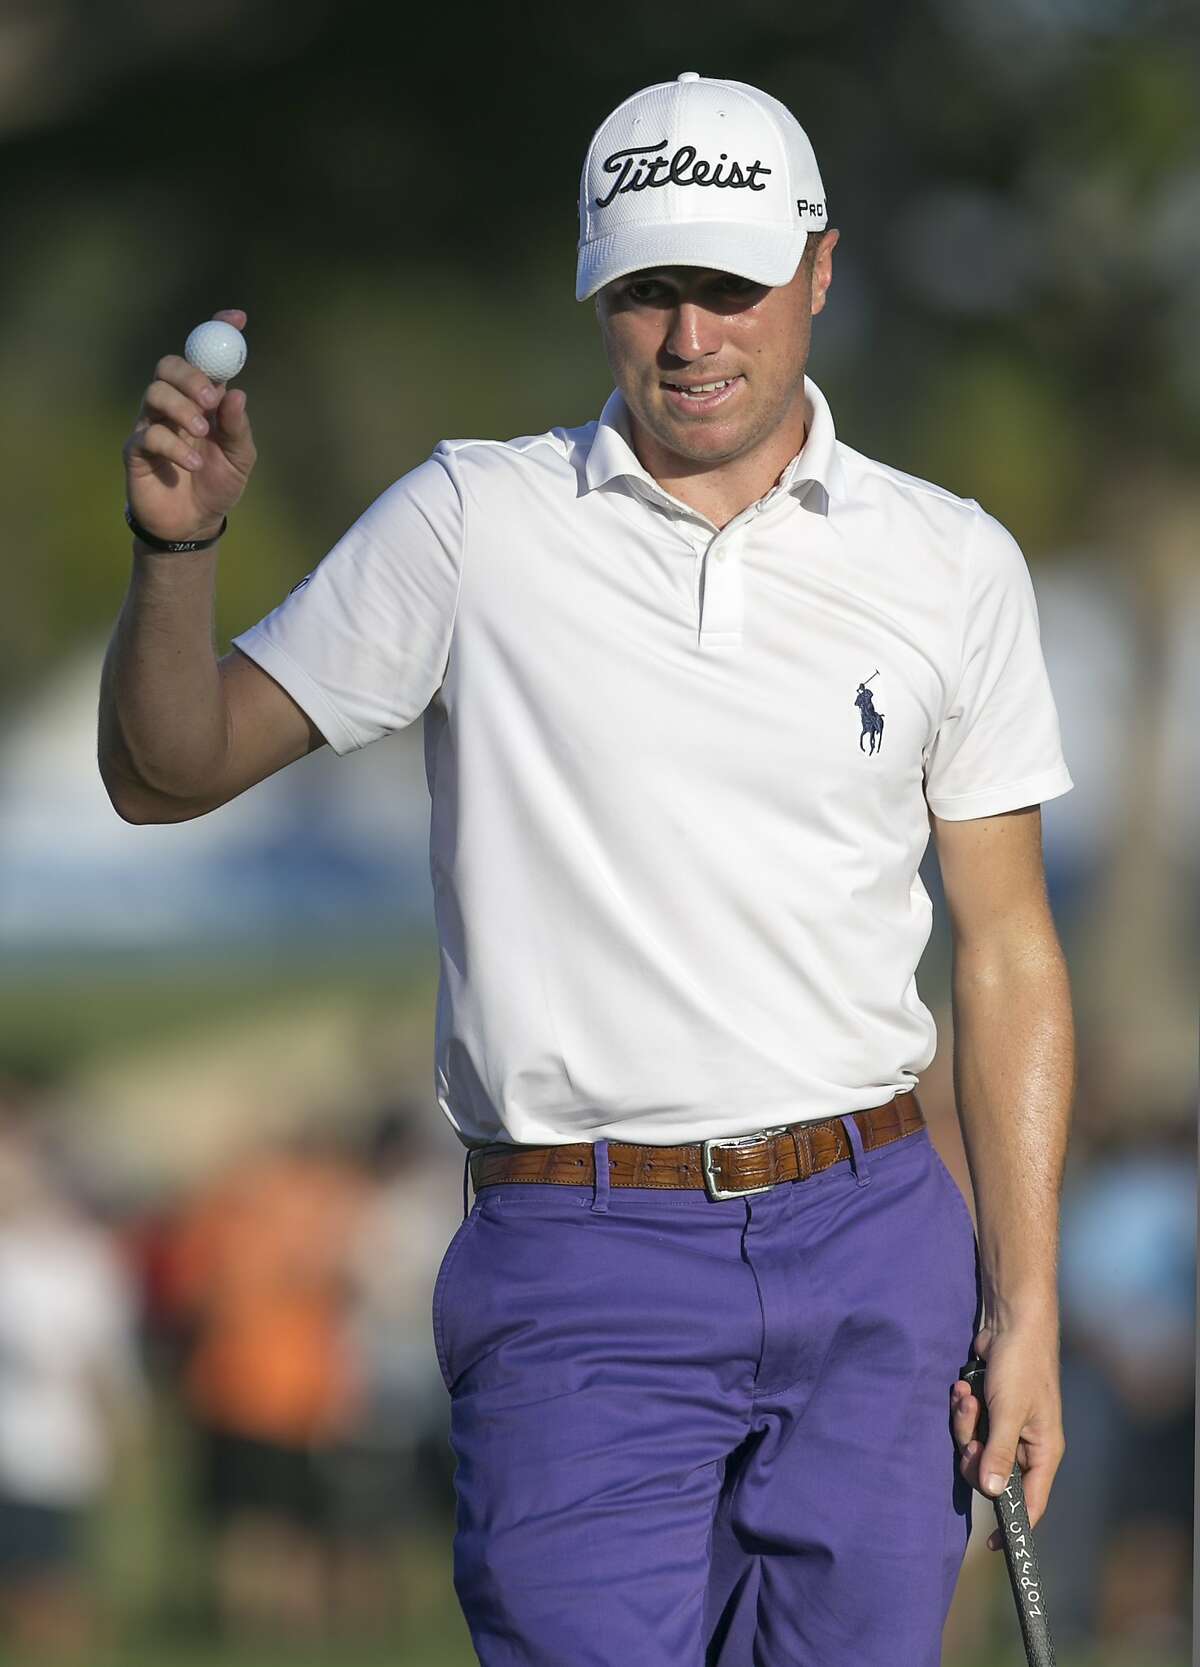 Justin Thomas waves to the gallery on the 18th green after finishing the second round at the Sony Open golf tournament, Friday, Jan. 13, 2017, in Honolulu. (AP Photo/Marco Garcia)